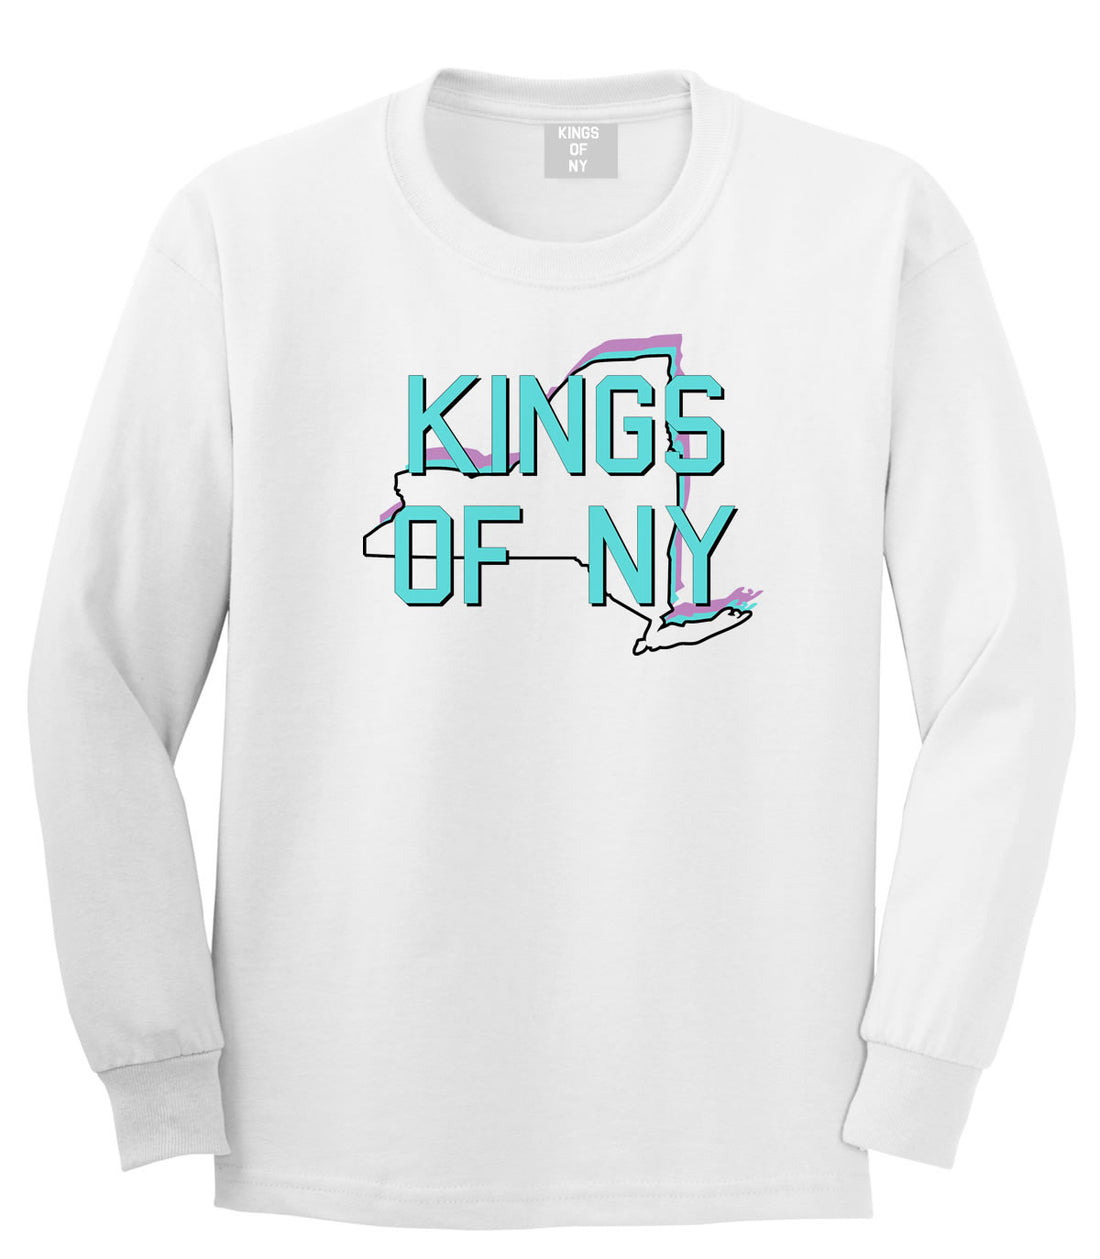 New York State Outline Boys Kids Long Sleeve T-Shirt in White by Kings Of NY